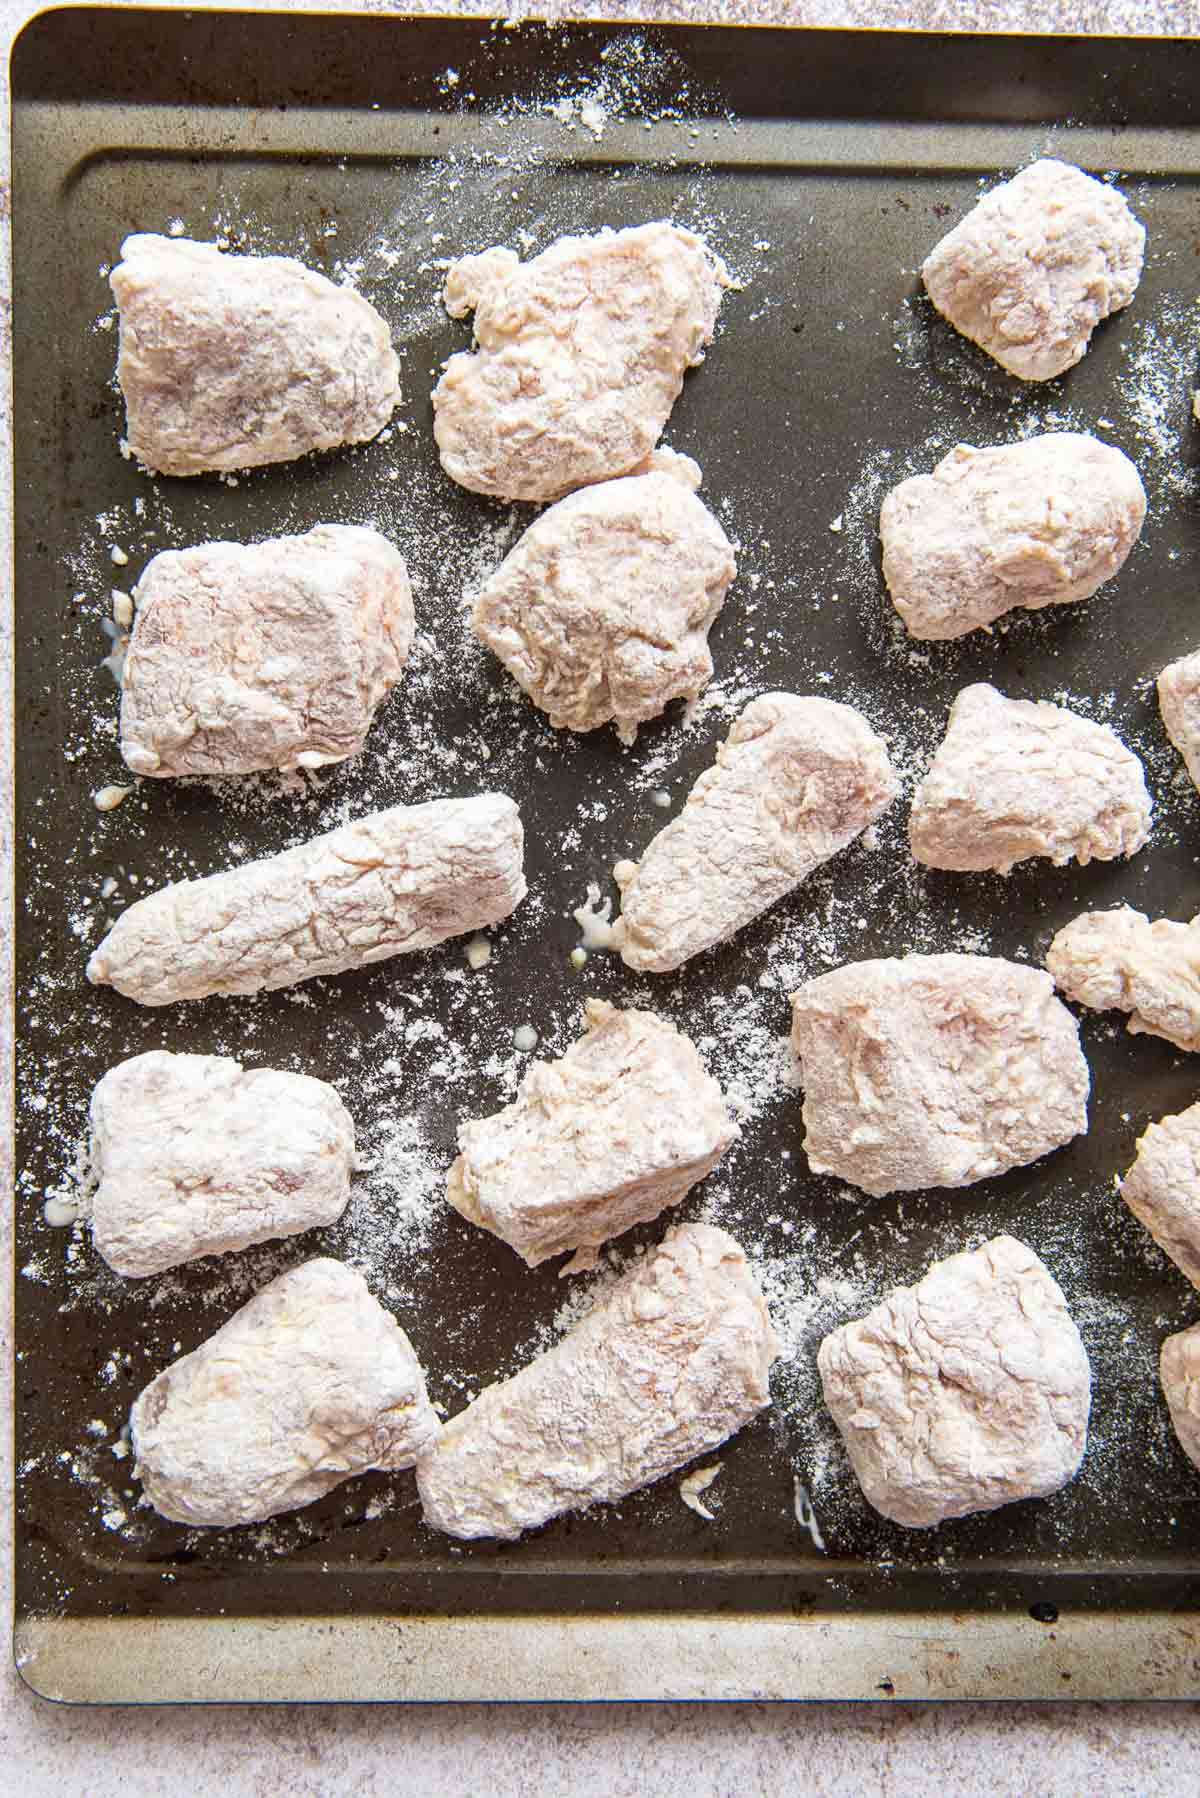 Flour coated pieces of chicken on a baking tray.
